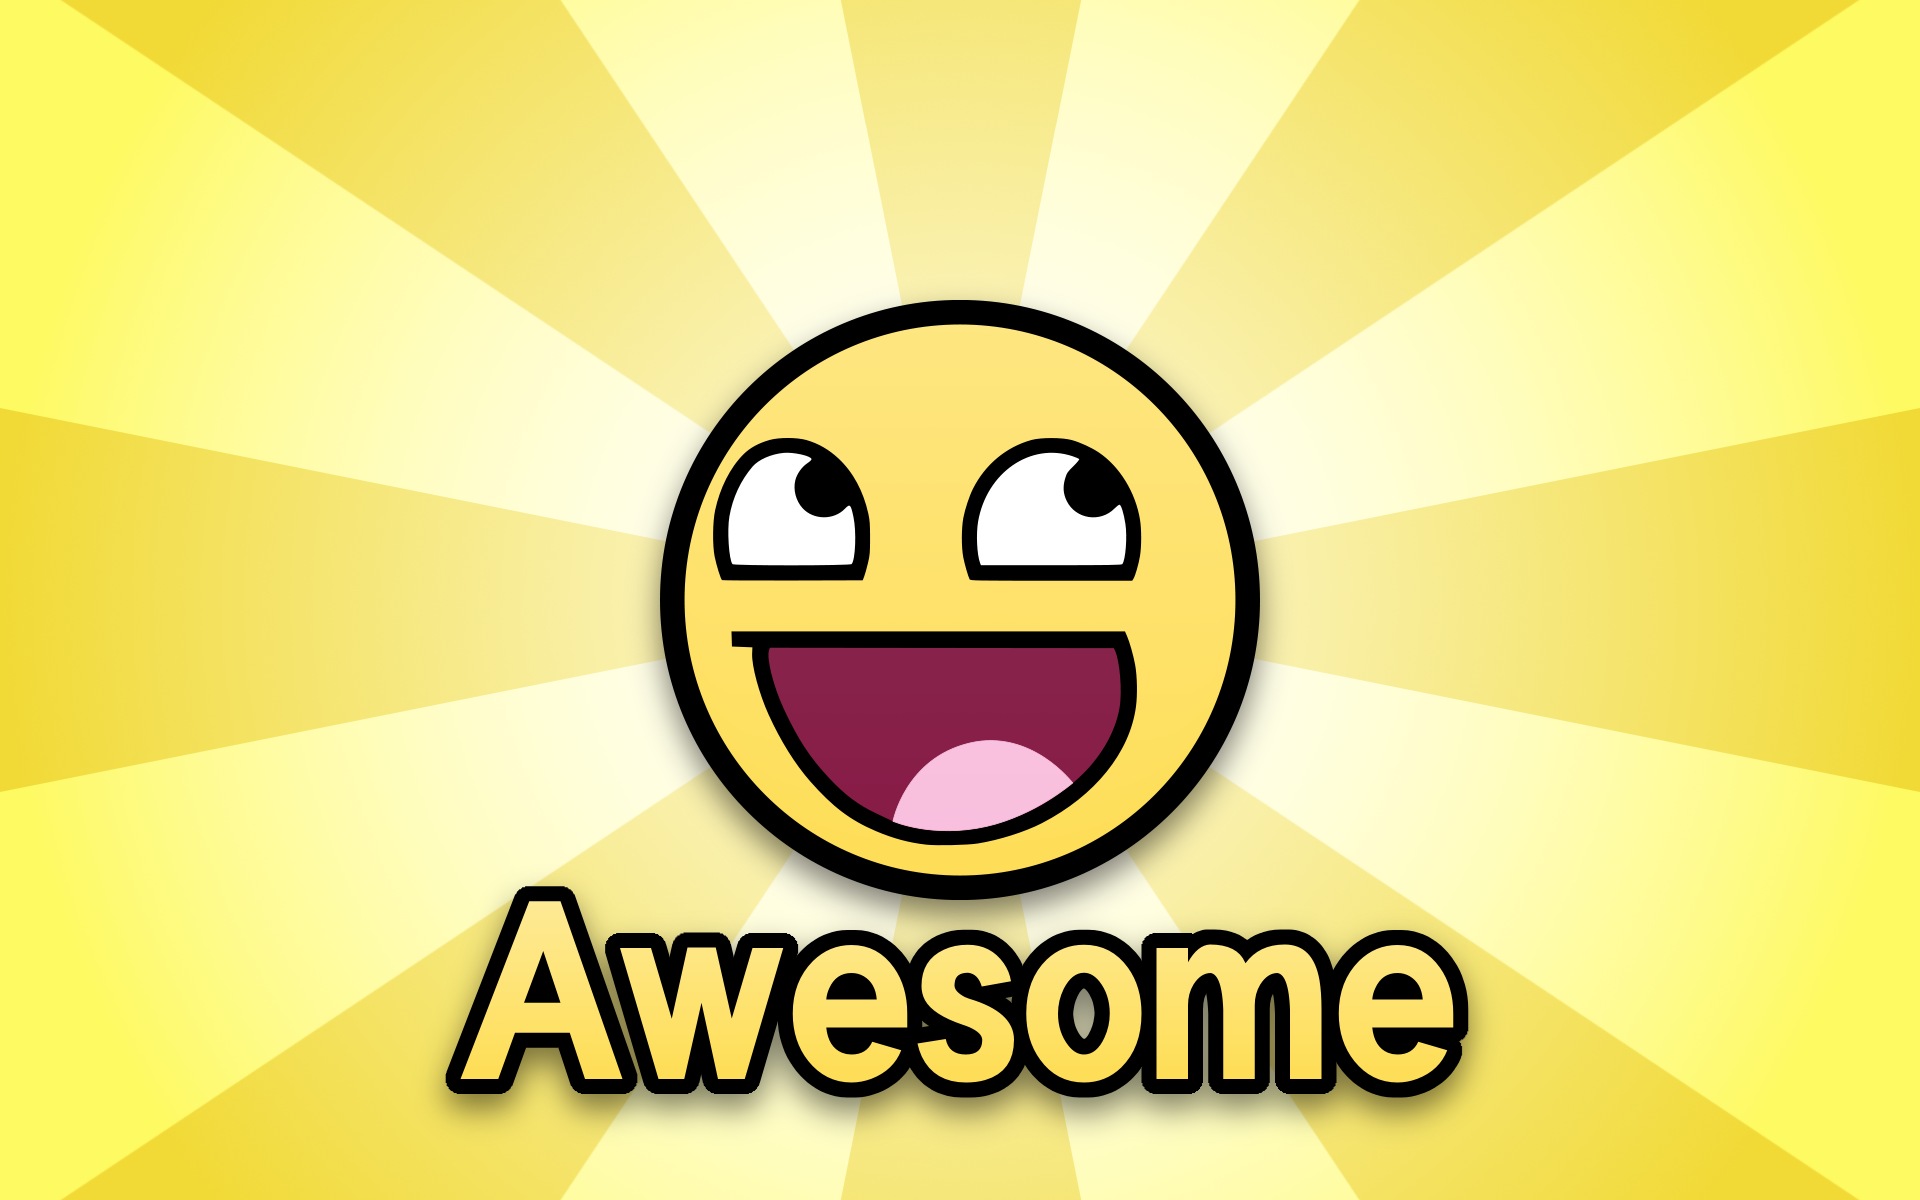 AWESOME-FACE-awesome-face-29339096-1920-